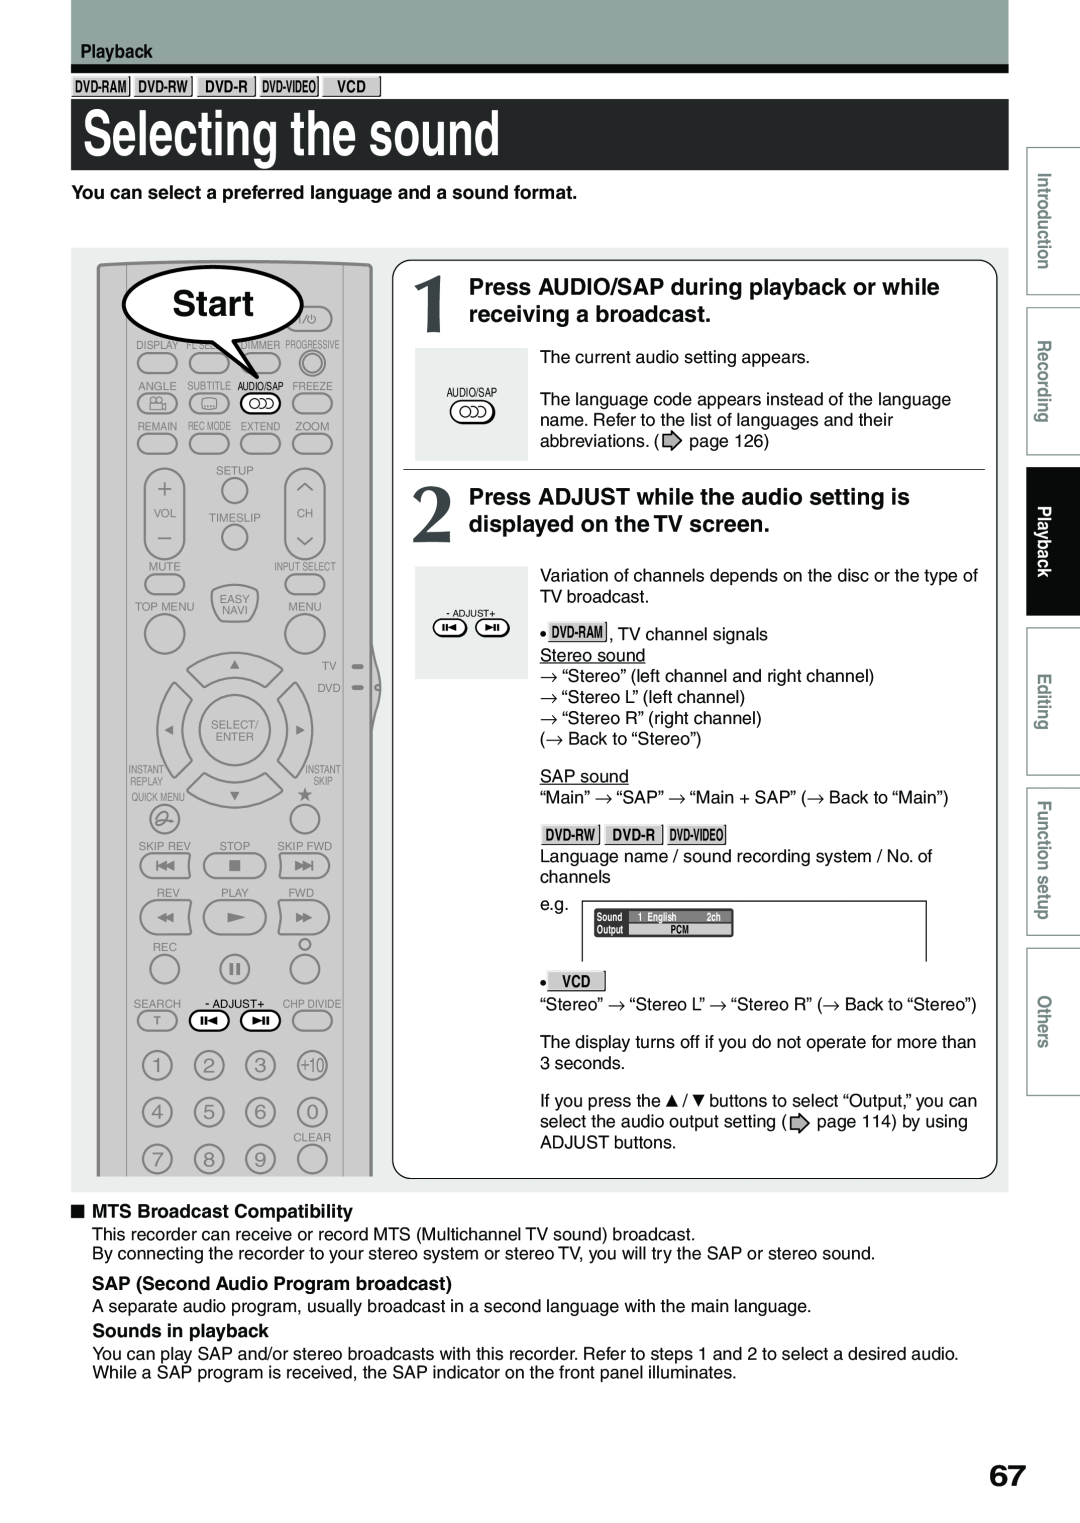 Toshiba D-R4SU Selecting the sound, Press AUDIO/SAP during playback or while, receiving a broadcast, Sounds in playback 